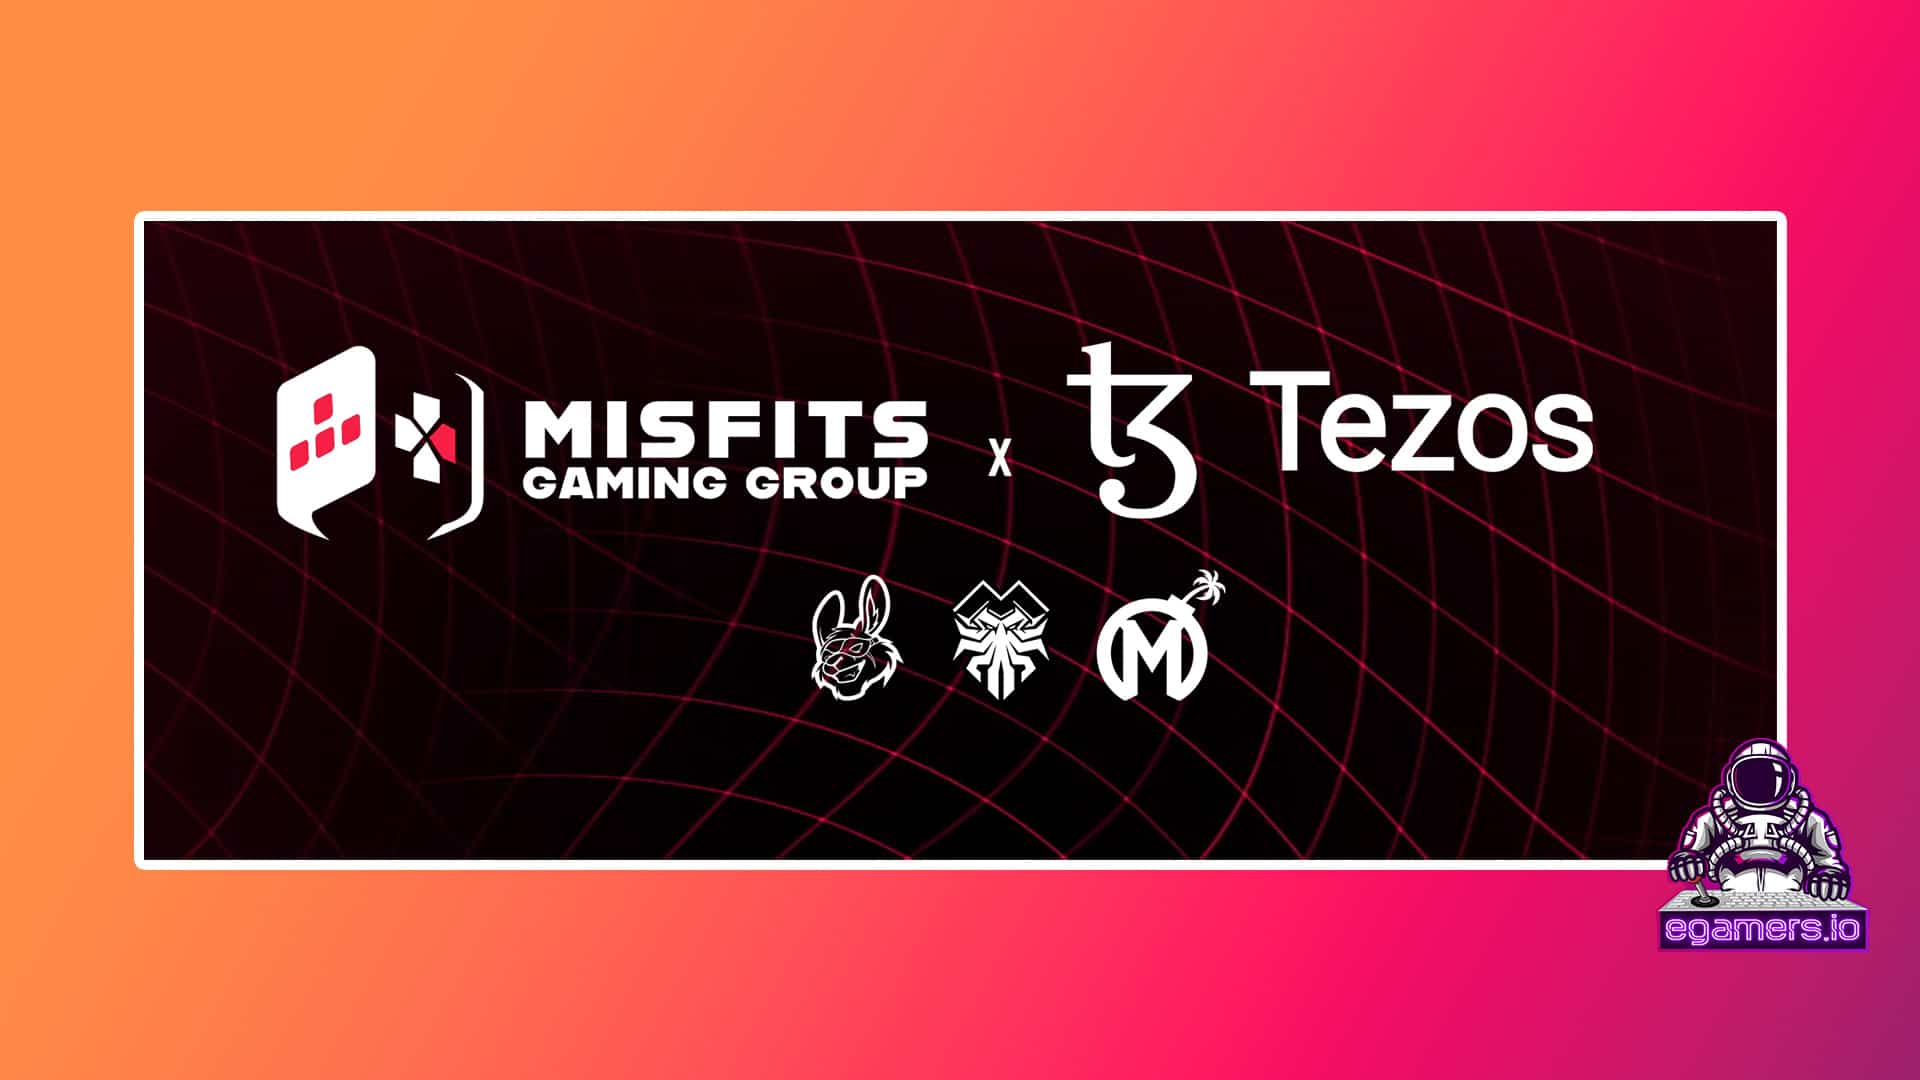 Misfits Gaming Group Selects Tezos as Official Blockchain, Launches Proprietary ‘Block Born’ Gaming Community & More